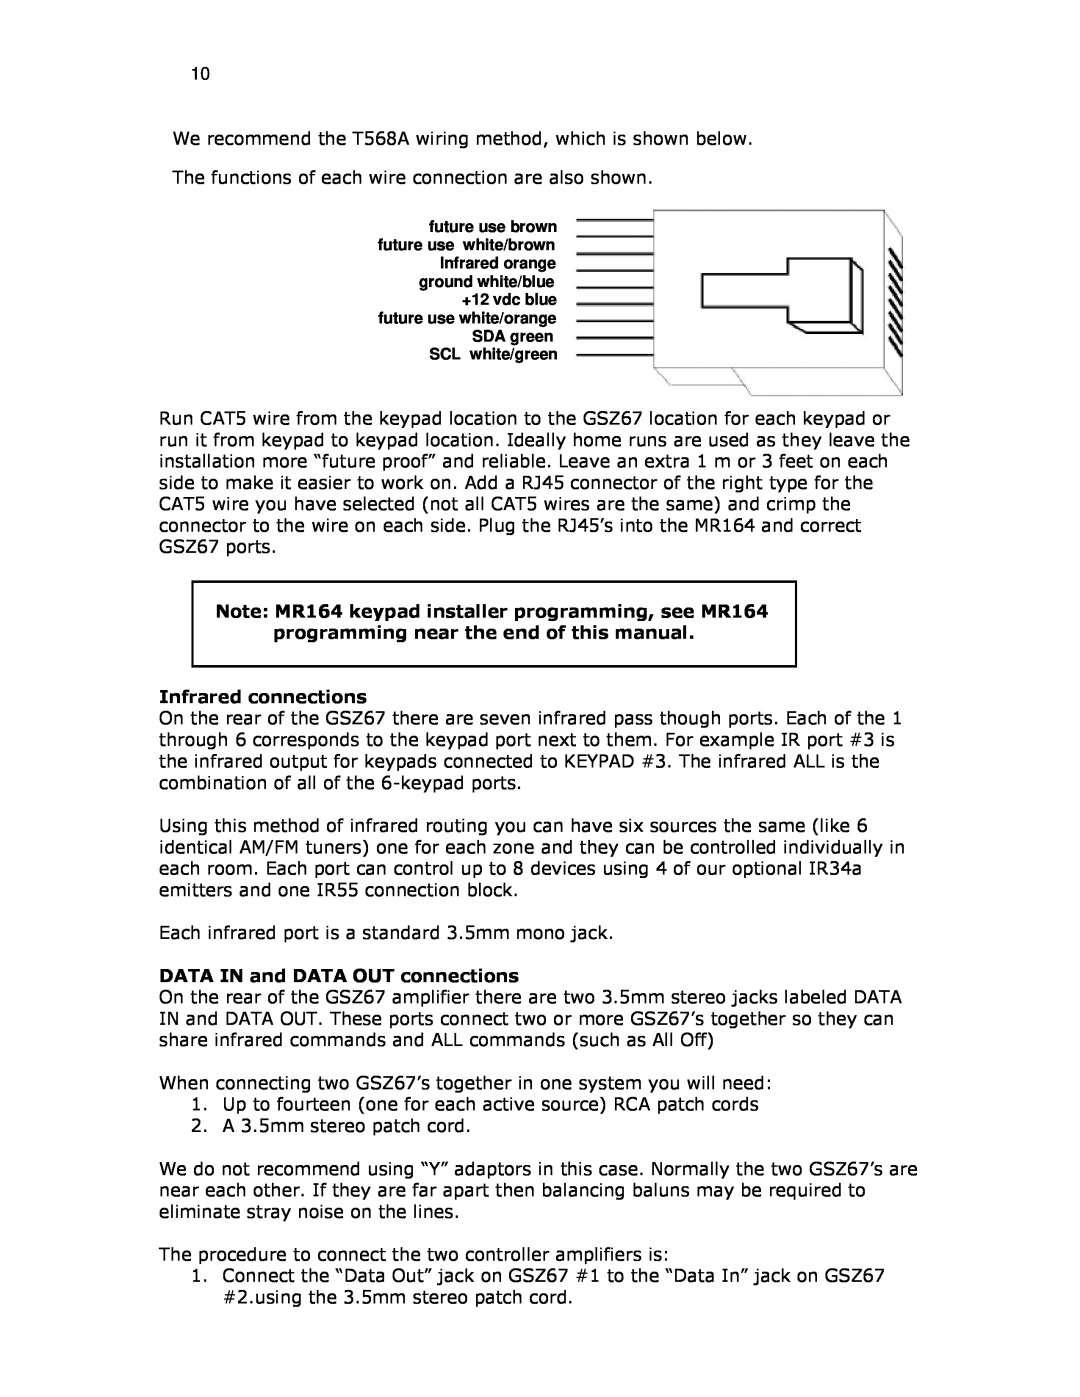 Knoll GSZ67 installation instructions Infrared connections, DATA IN and DATA OUT connections 